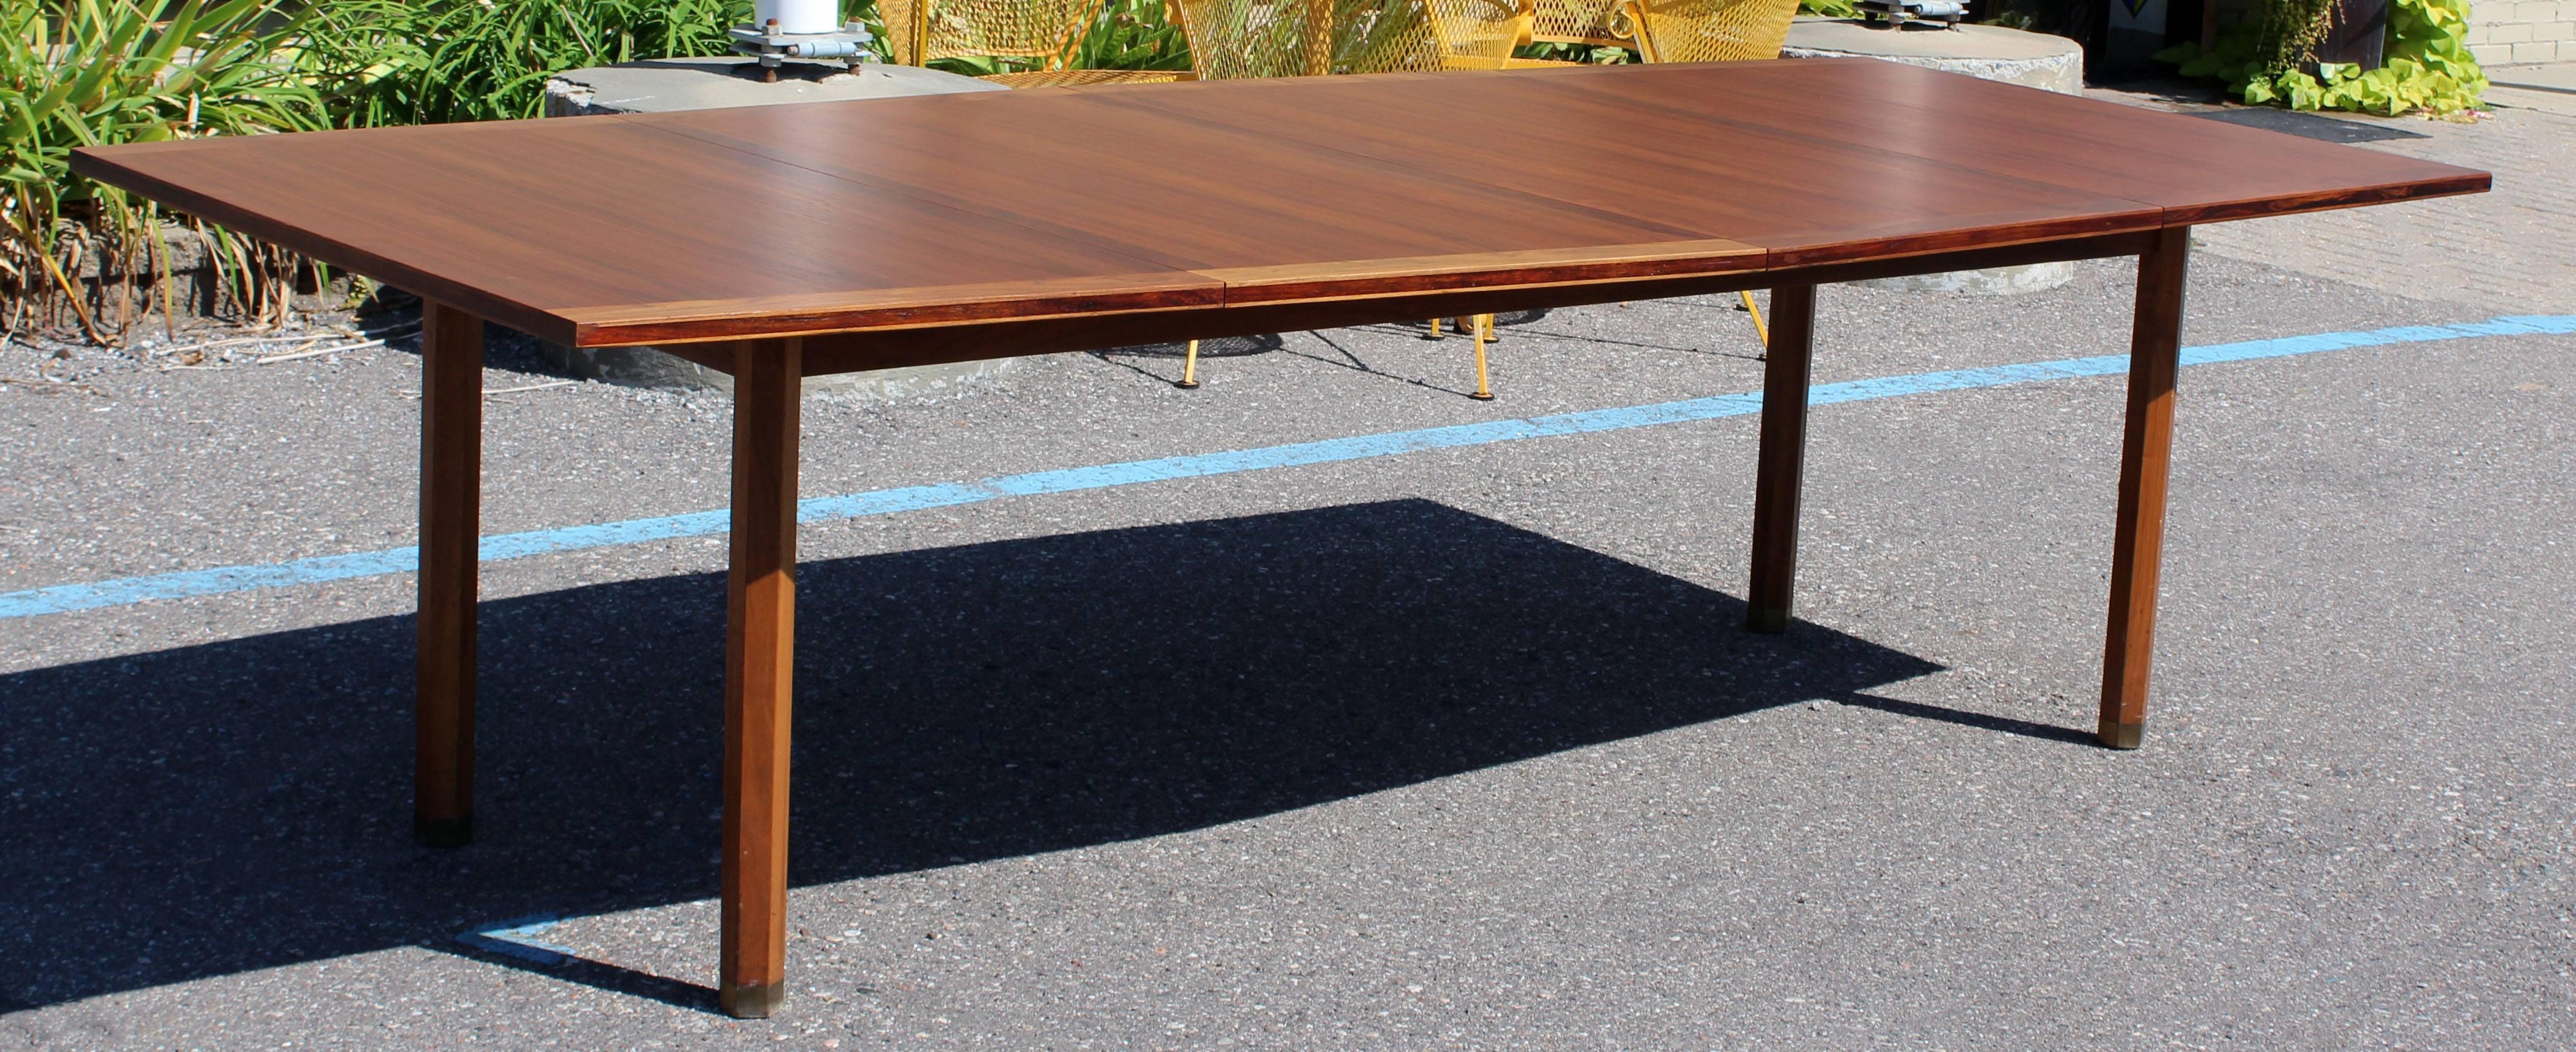 For your consideration is a uniquely fabulous and rare dining or conference table, by Dunbar, with two leaves, circa 1960s. Beautiful brass feet caps. Top just came back from being professionally refinished. In excellent condition. The dimensions